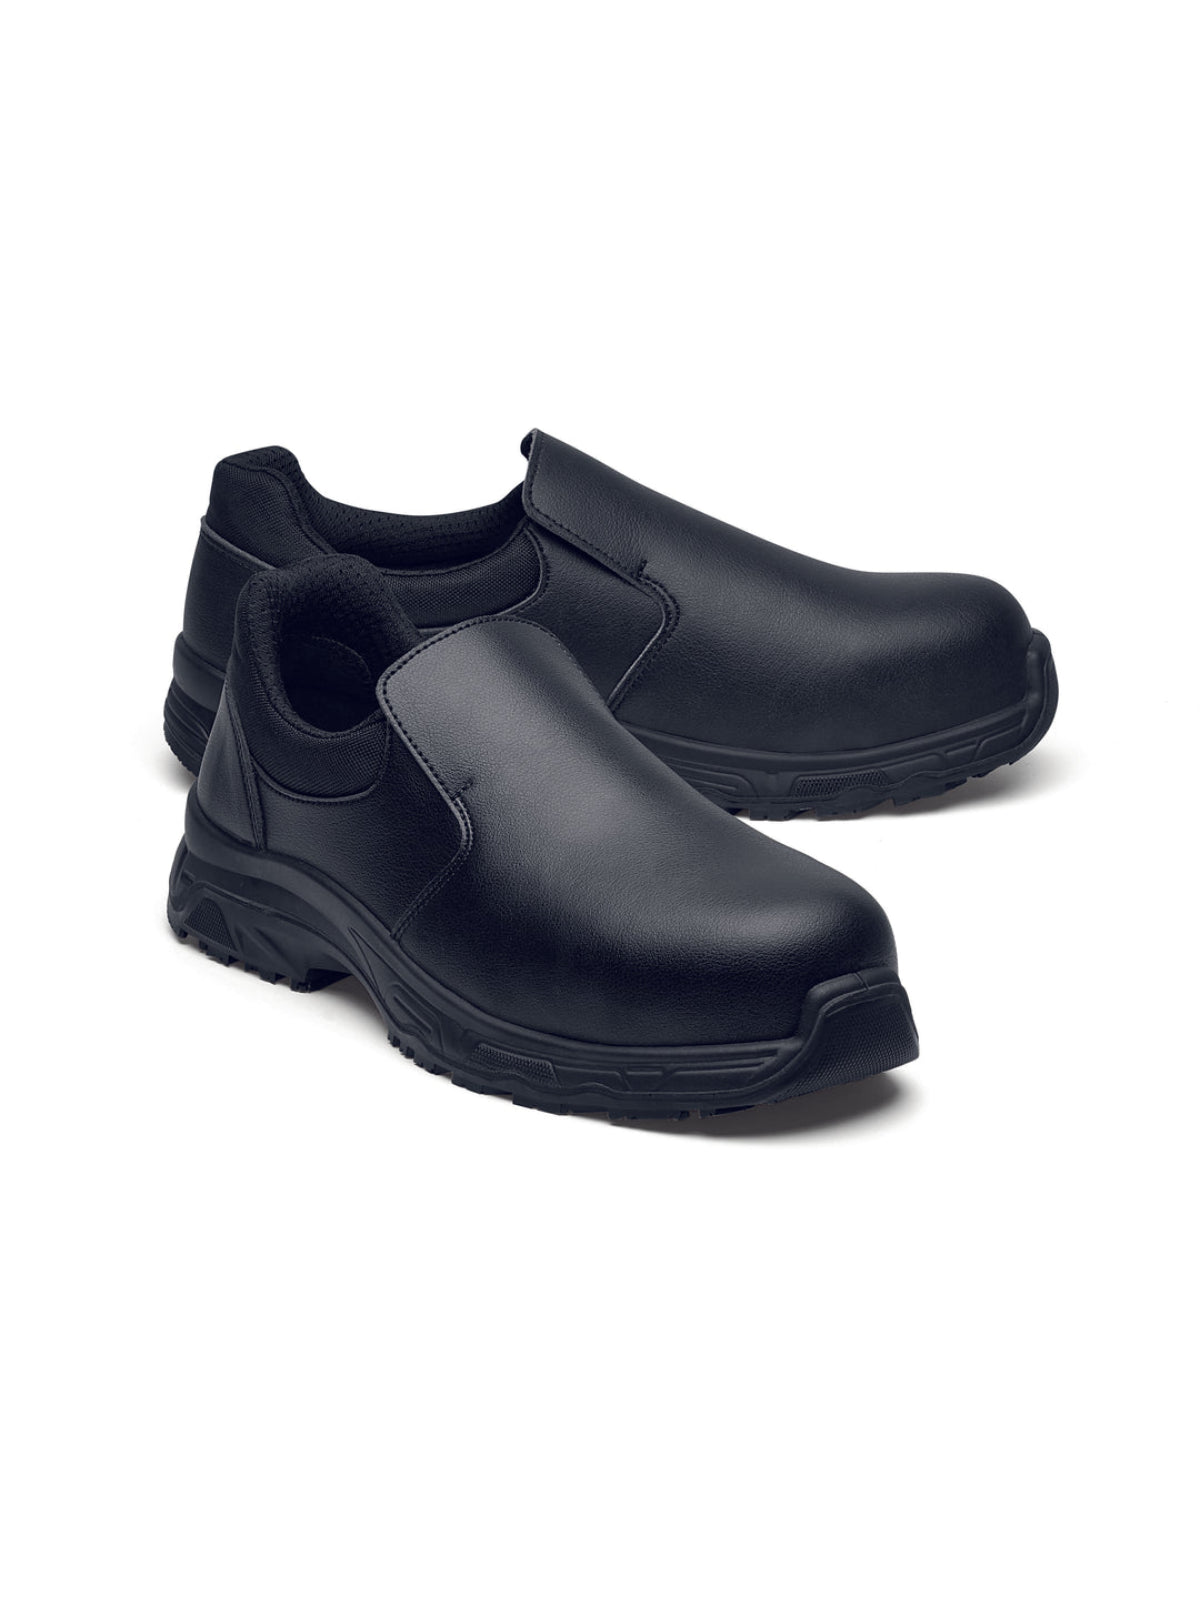 Unisex Safety Shoe Catania (S3) by Shoes For Crews